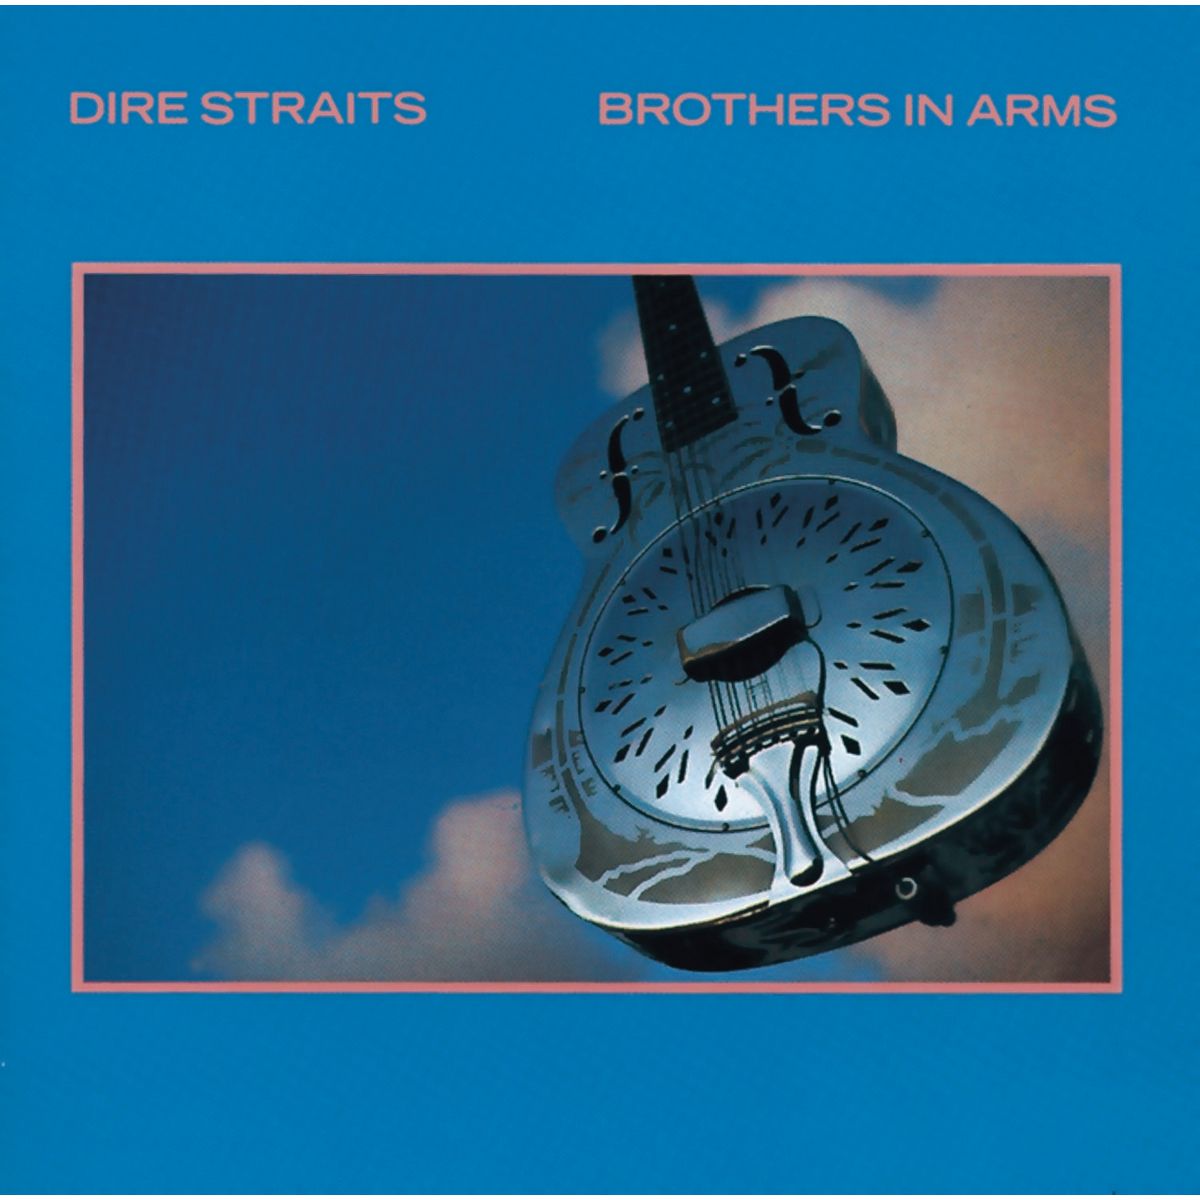 Brothers in Arms - Dire Straits Vinyle